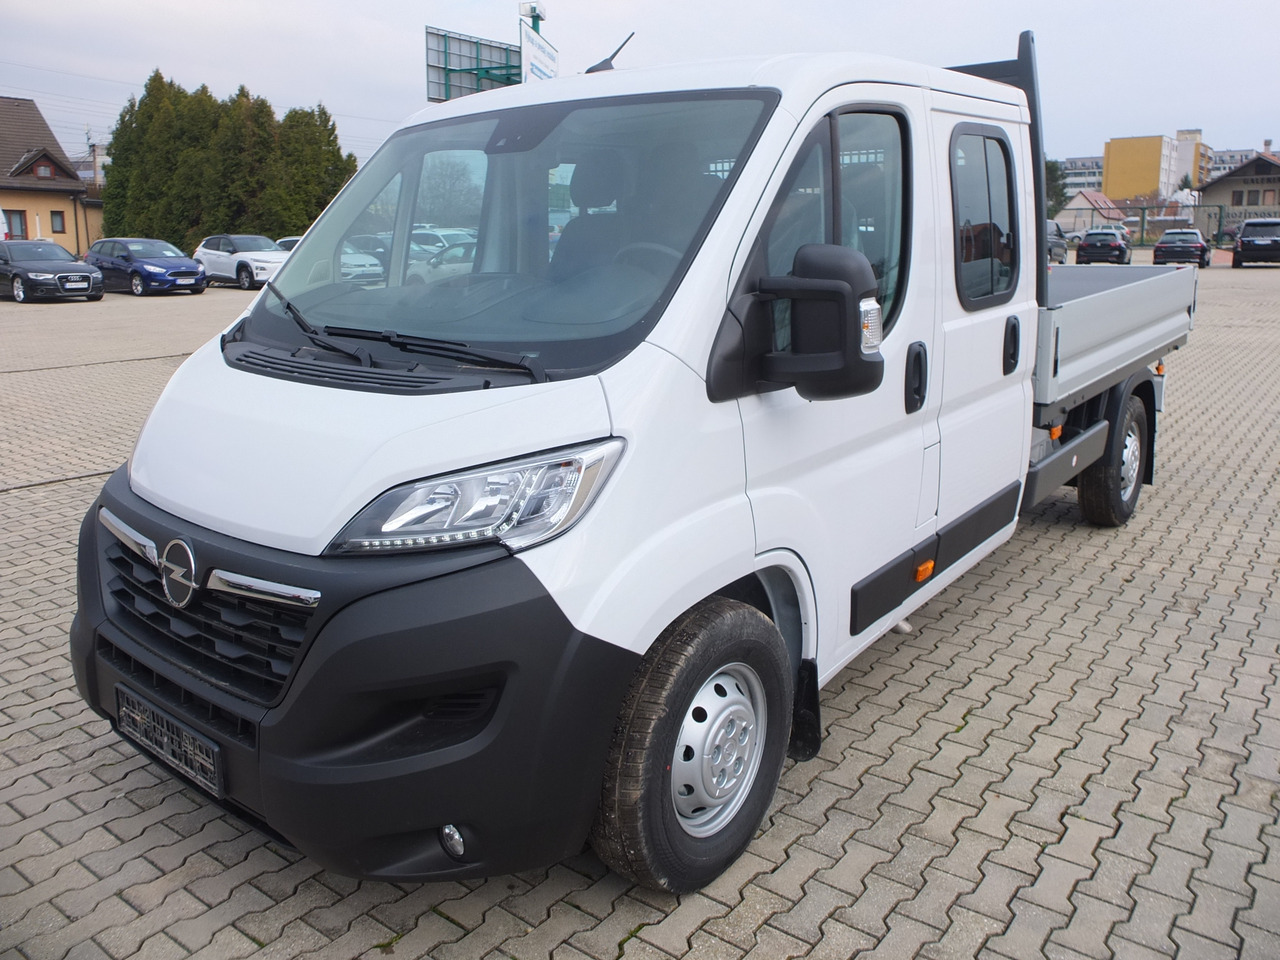 Véhicule utilitaire, Utilitaire double cabine neuf OPEL MOVANO L3  DOKA 13x ON STOCK: photos 5